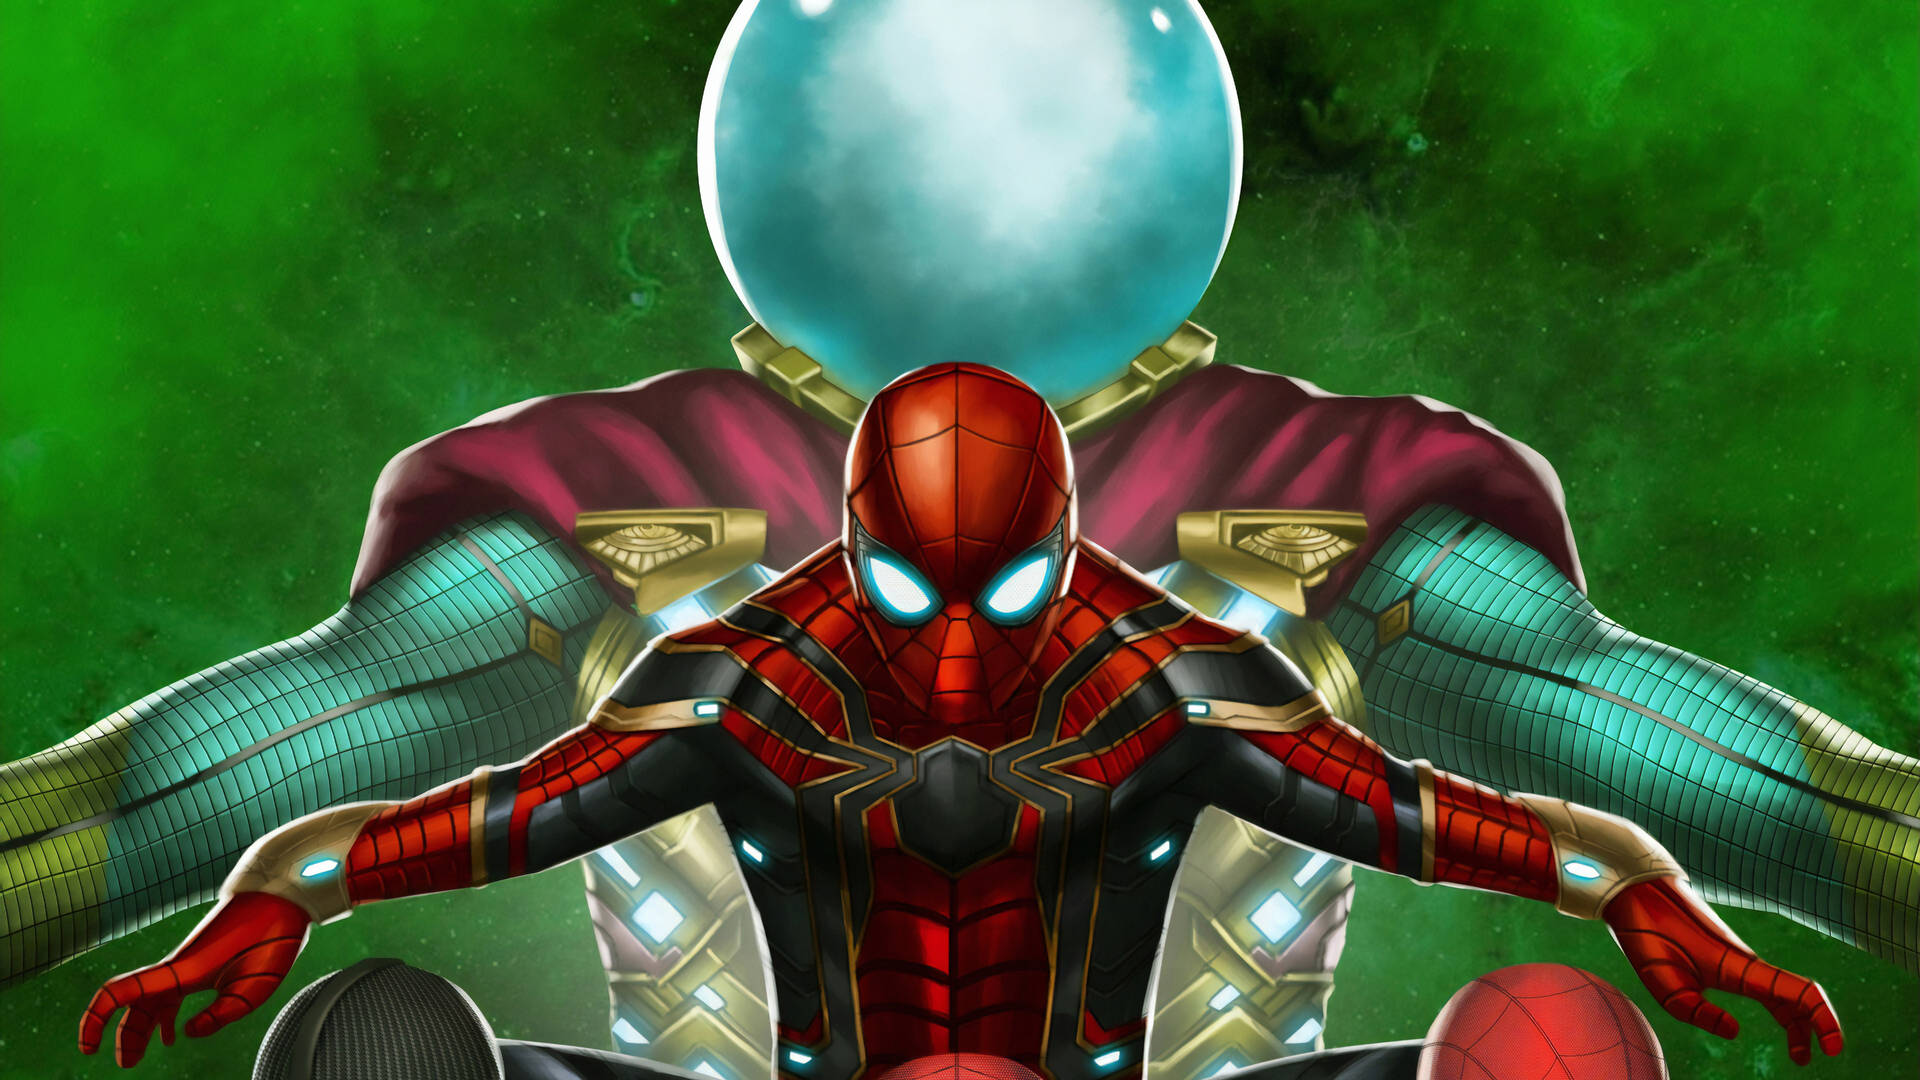 Giant Mysterio And Spider-Man Wallpaper